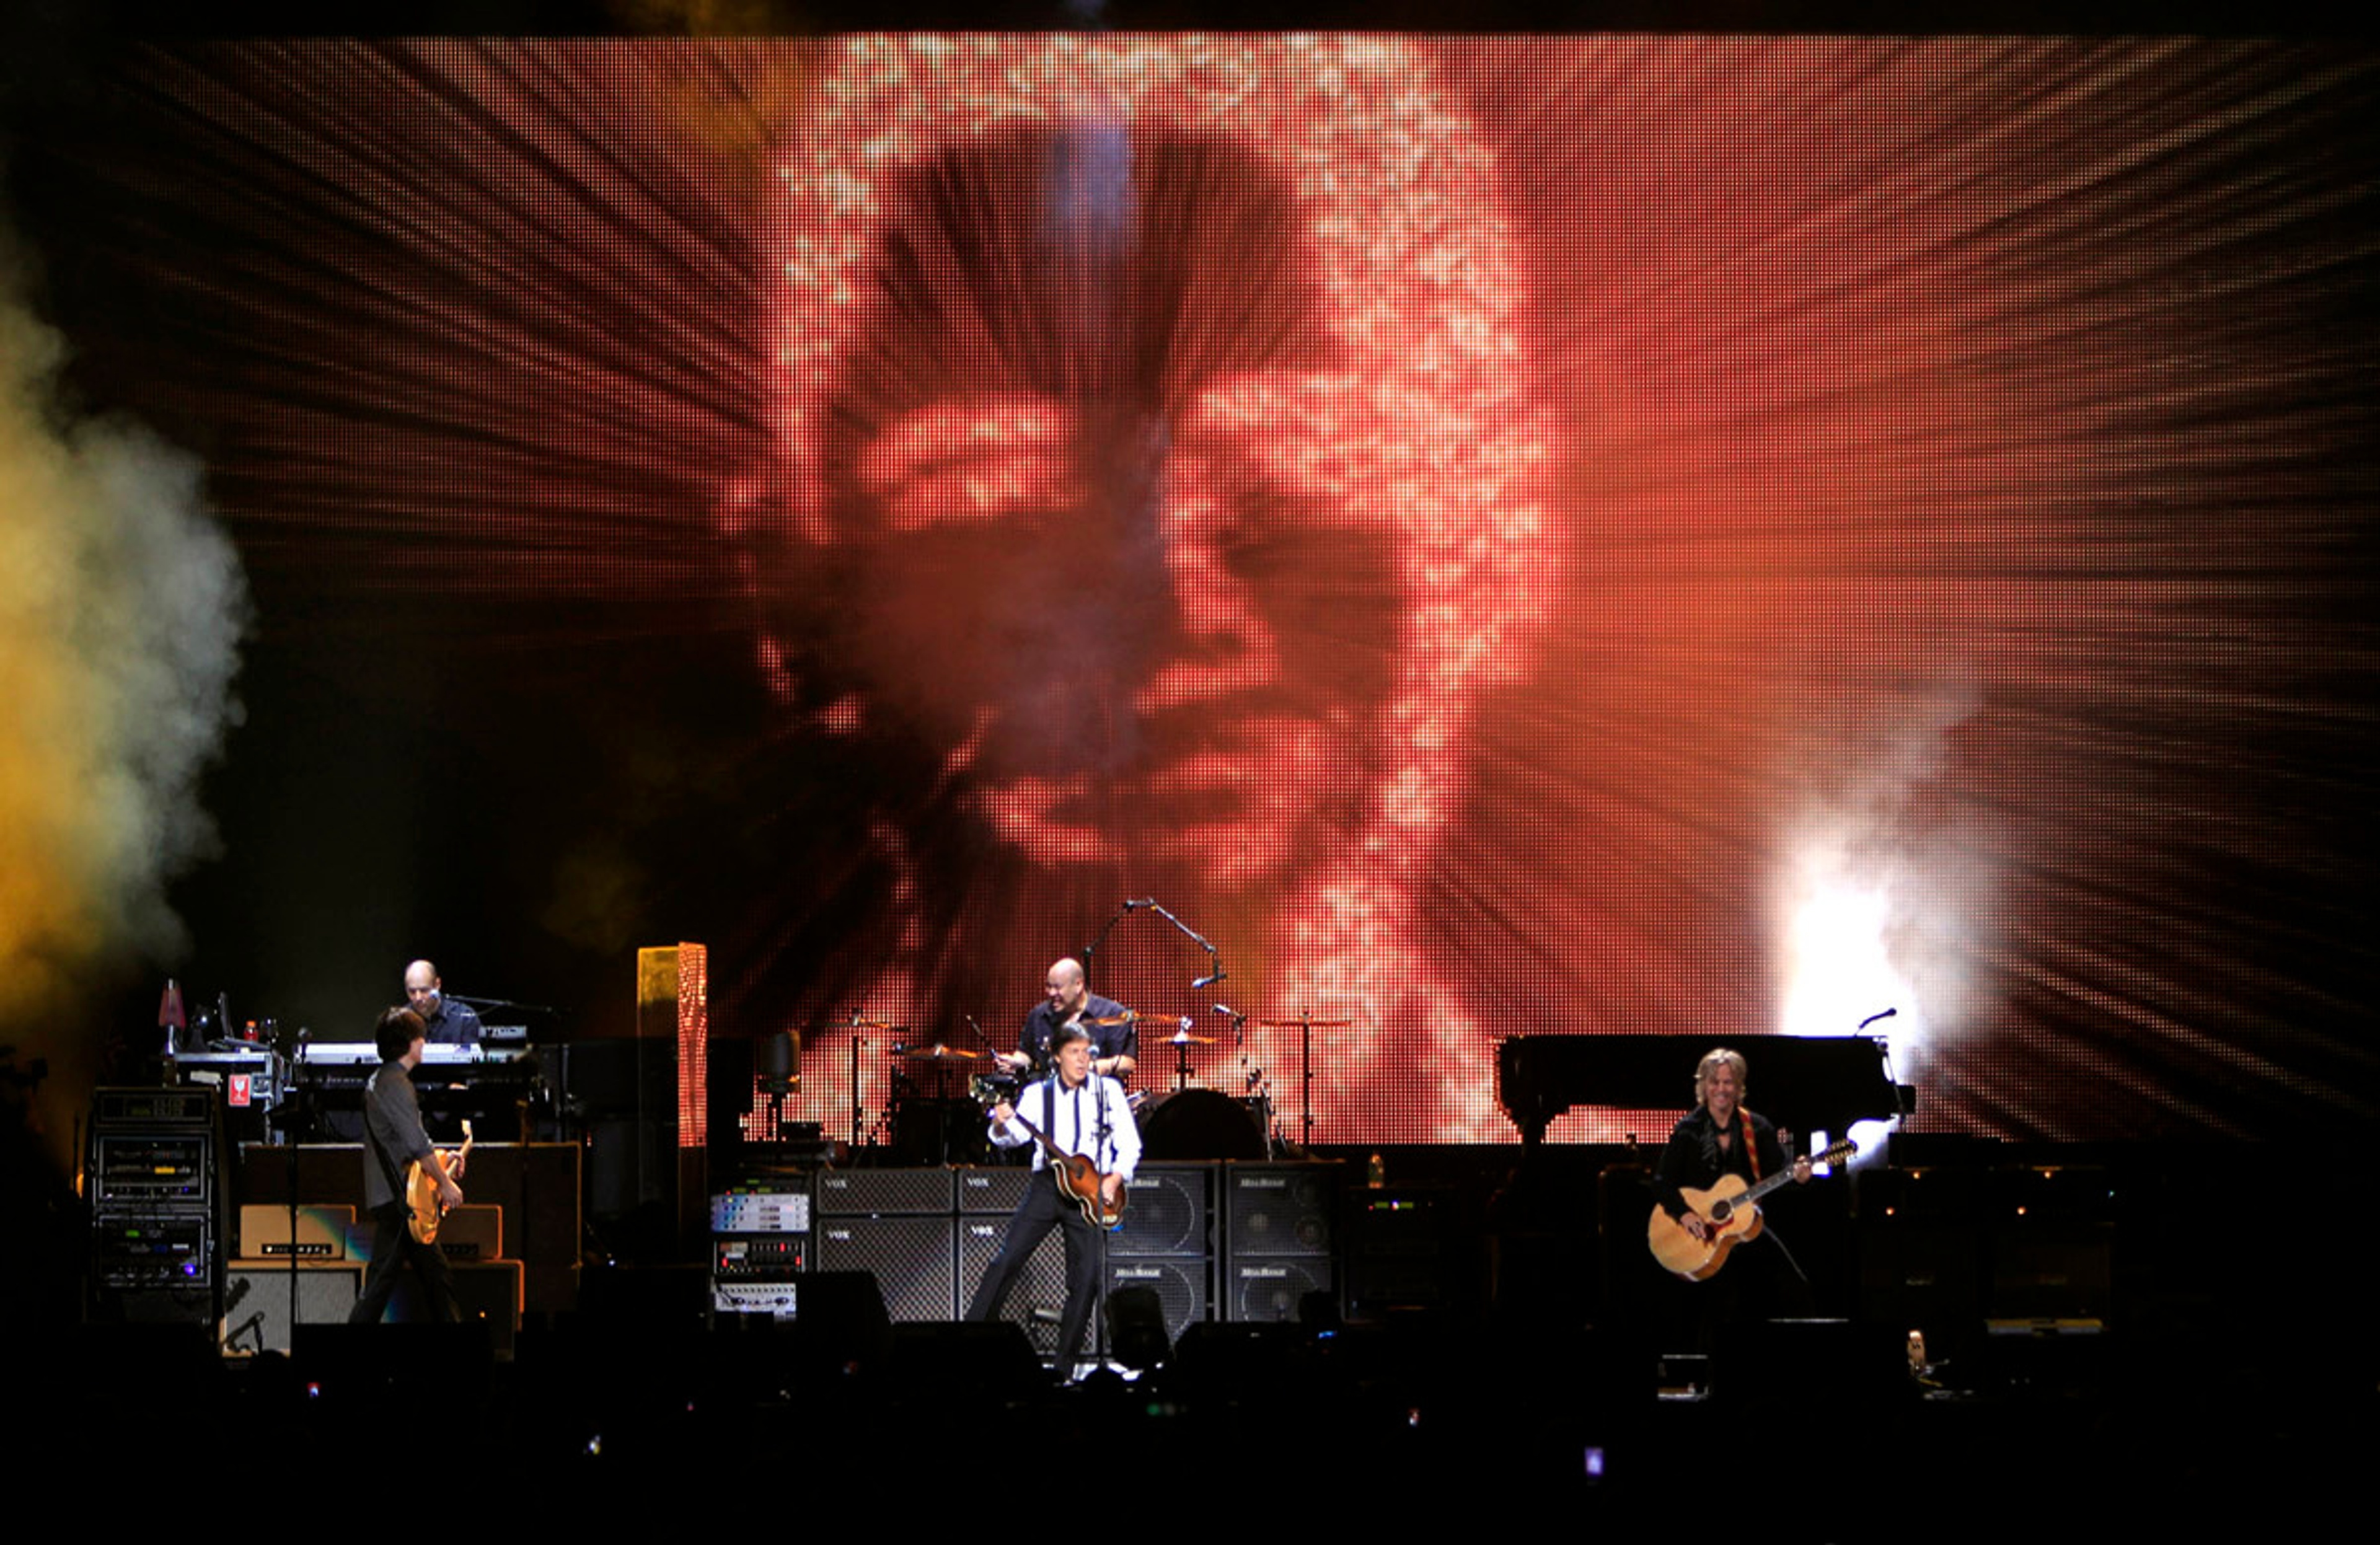 (L-R) Rusty, Wix, Paul, Abe and Brian on stage, Scottrade Center, St Louis, 11th November 2012